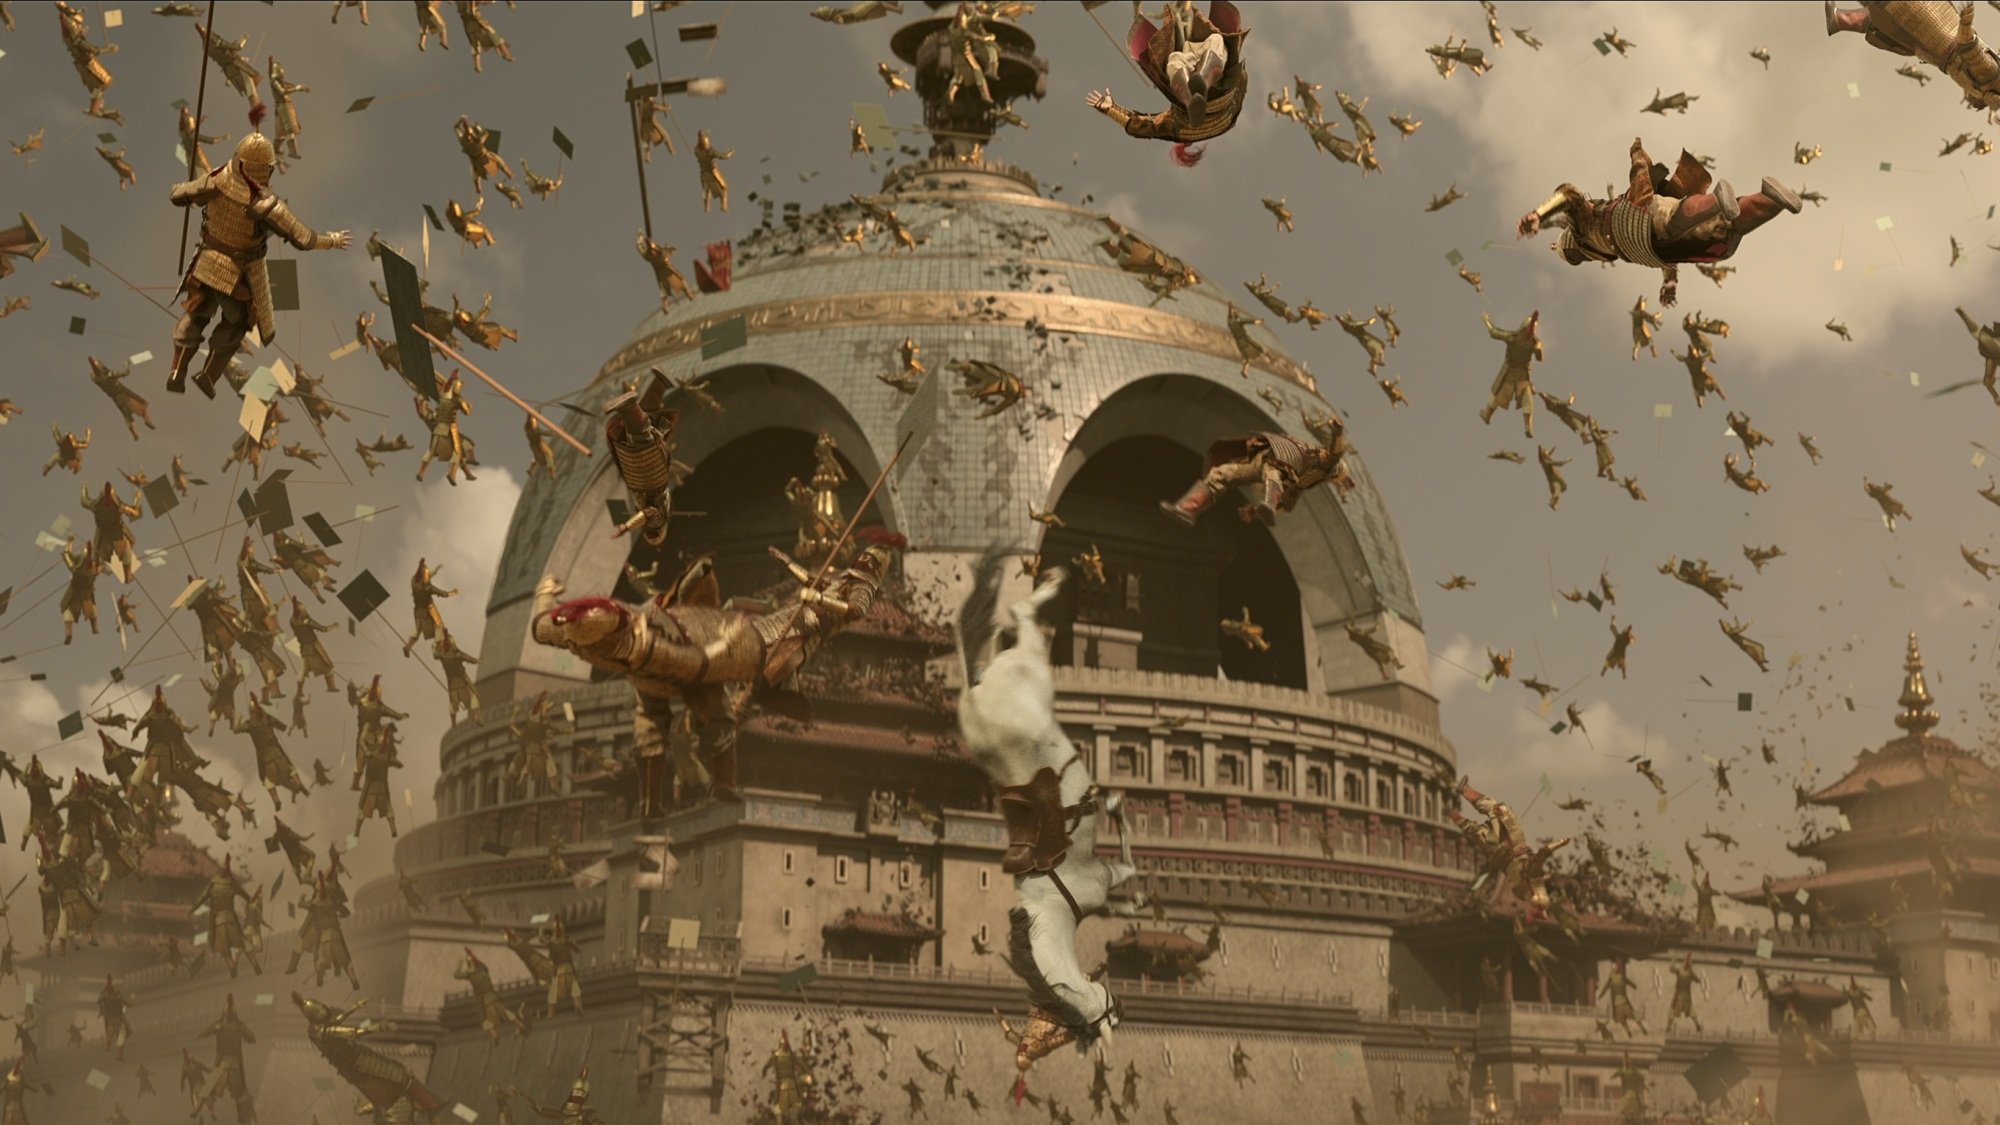 An army floats above an ornate dome.